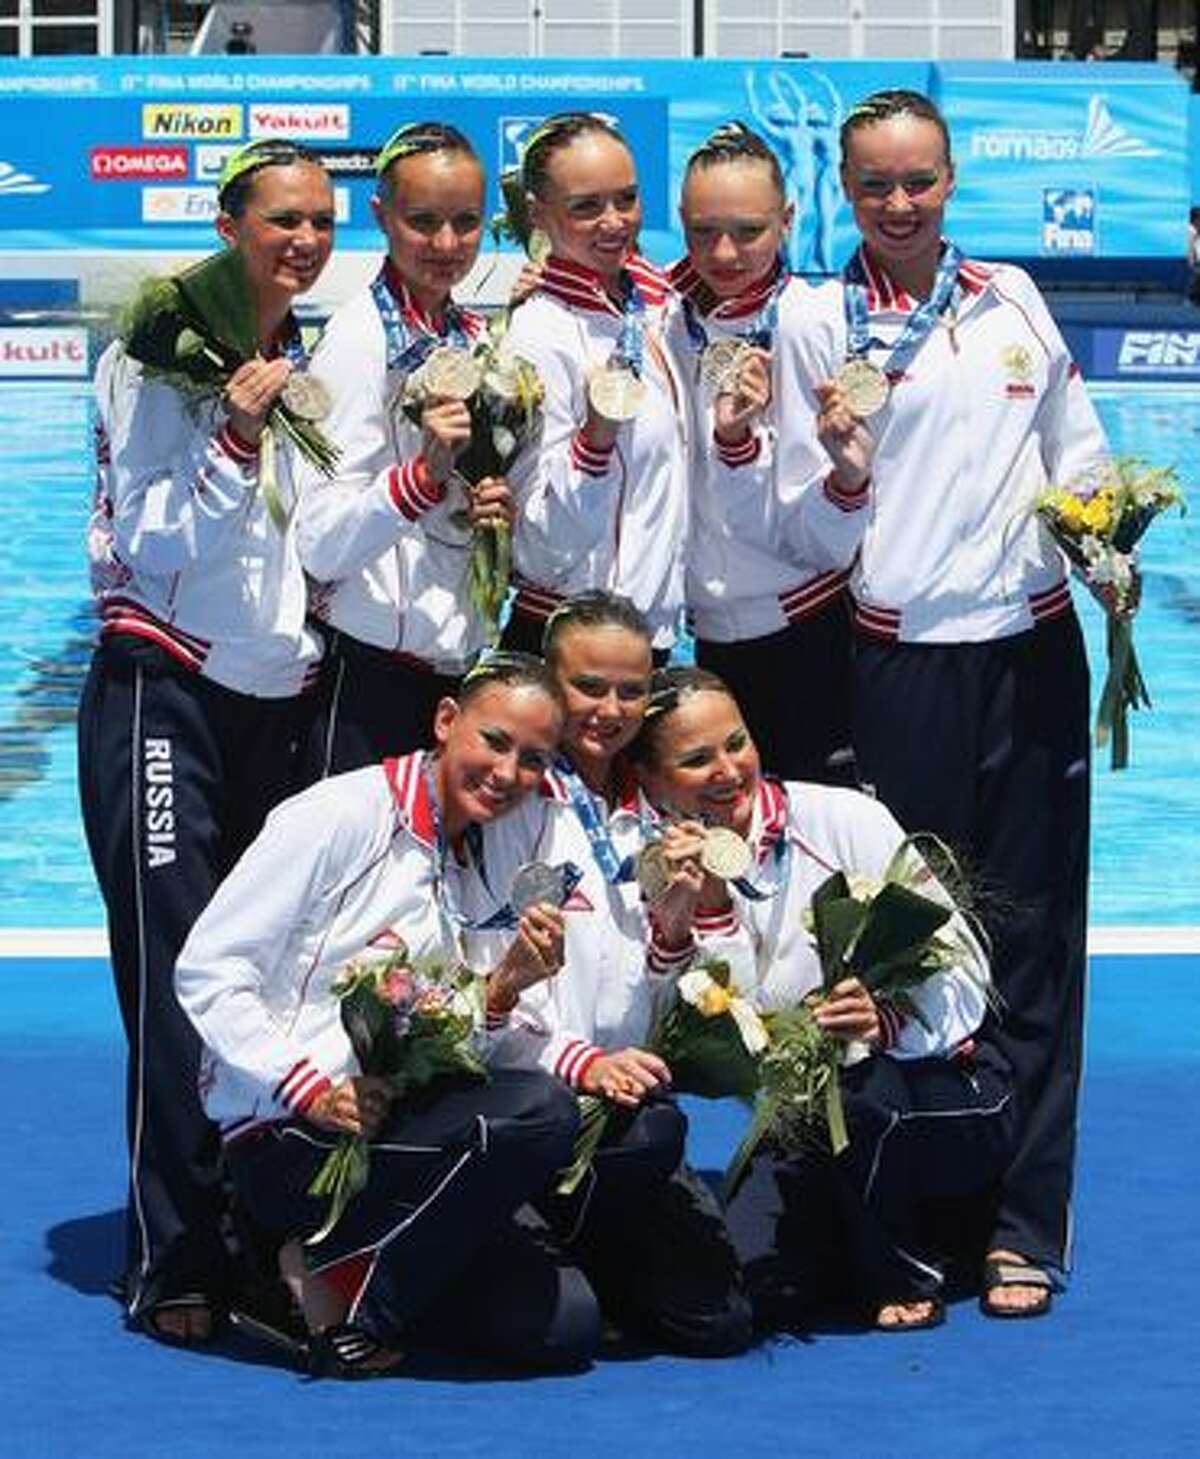 Team Russia celebrate winning Gold after the Womens Synchronised Swimming Team Technical Final at the Stadio del Nuoto Sincronizzato on Sunday in Rome, Italy.